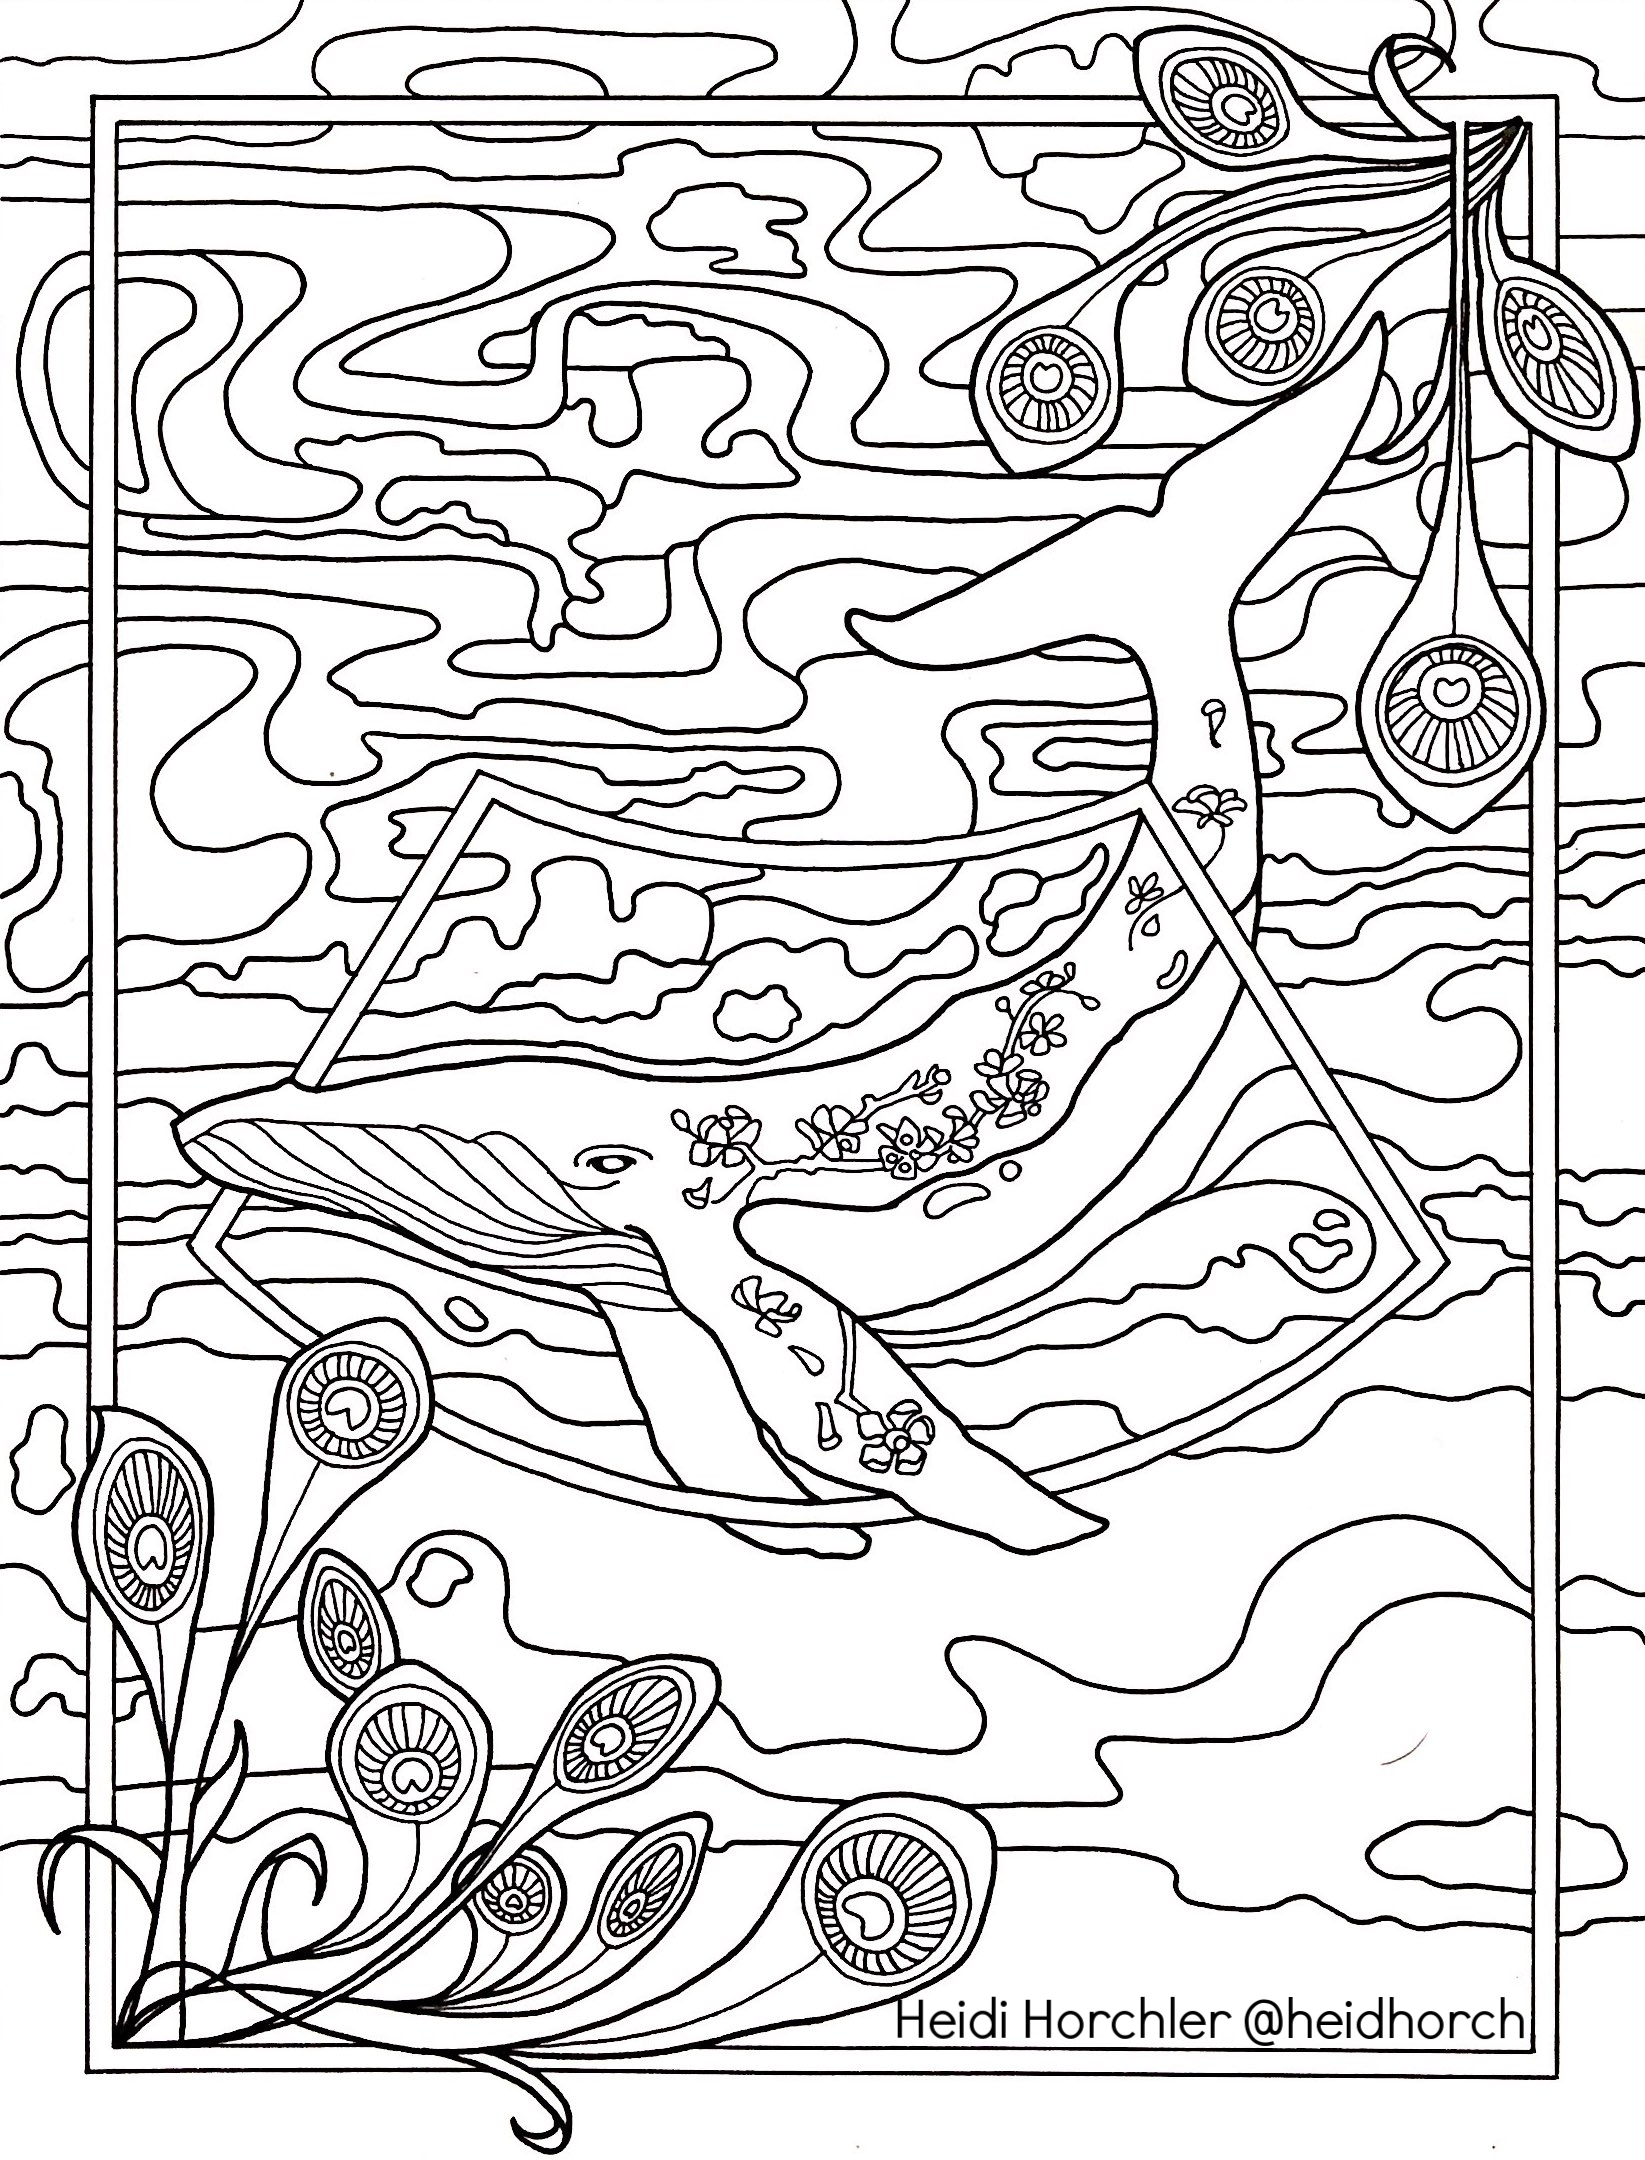 The Tattooed Whale - Daydream Odyssey coloring page